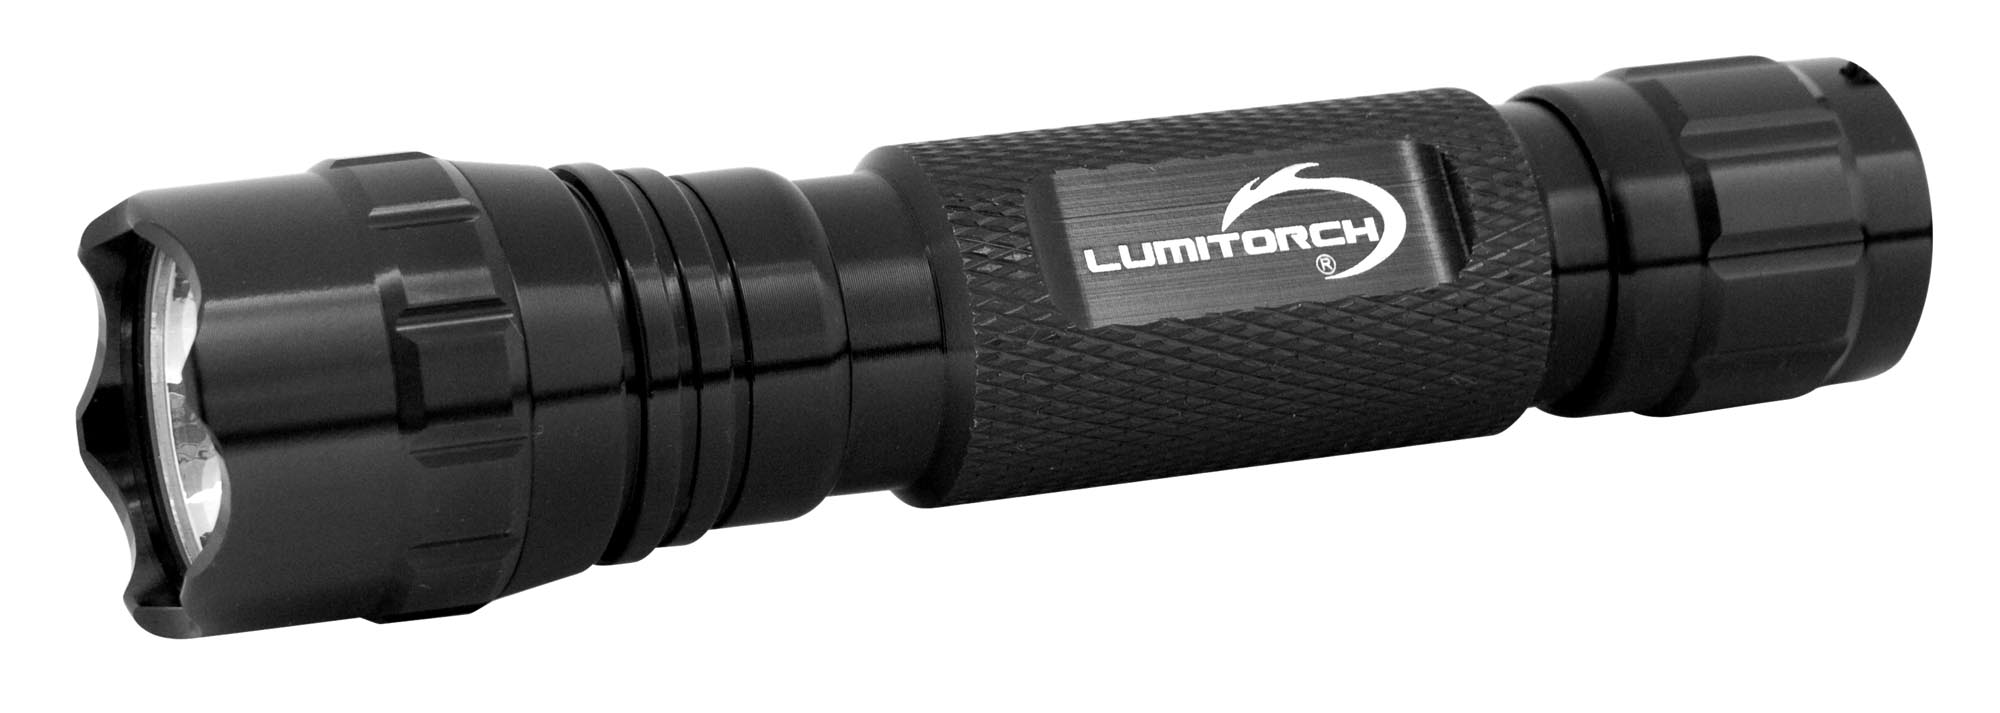  Lampe  torche  LED CREE 950 lumens Lumitorch Comet Airsoft